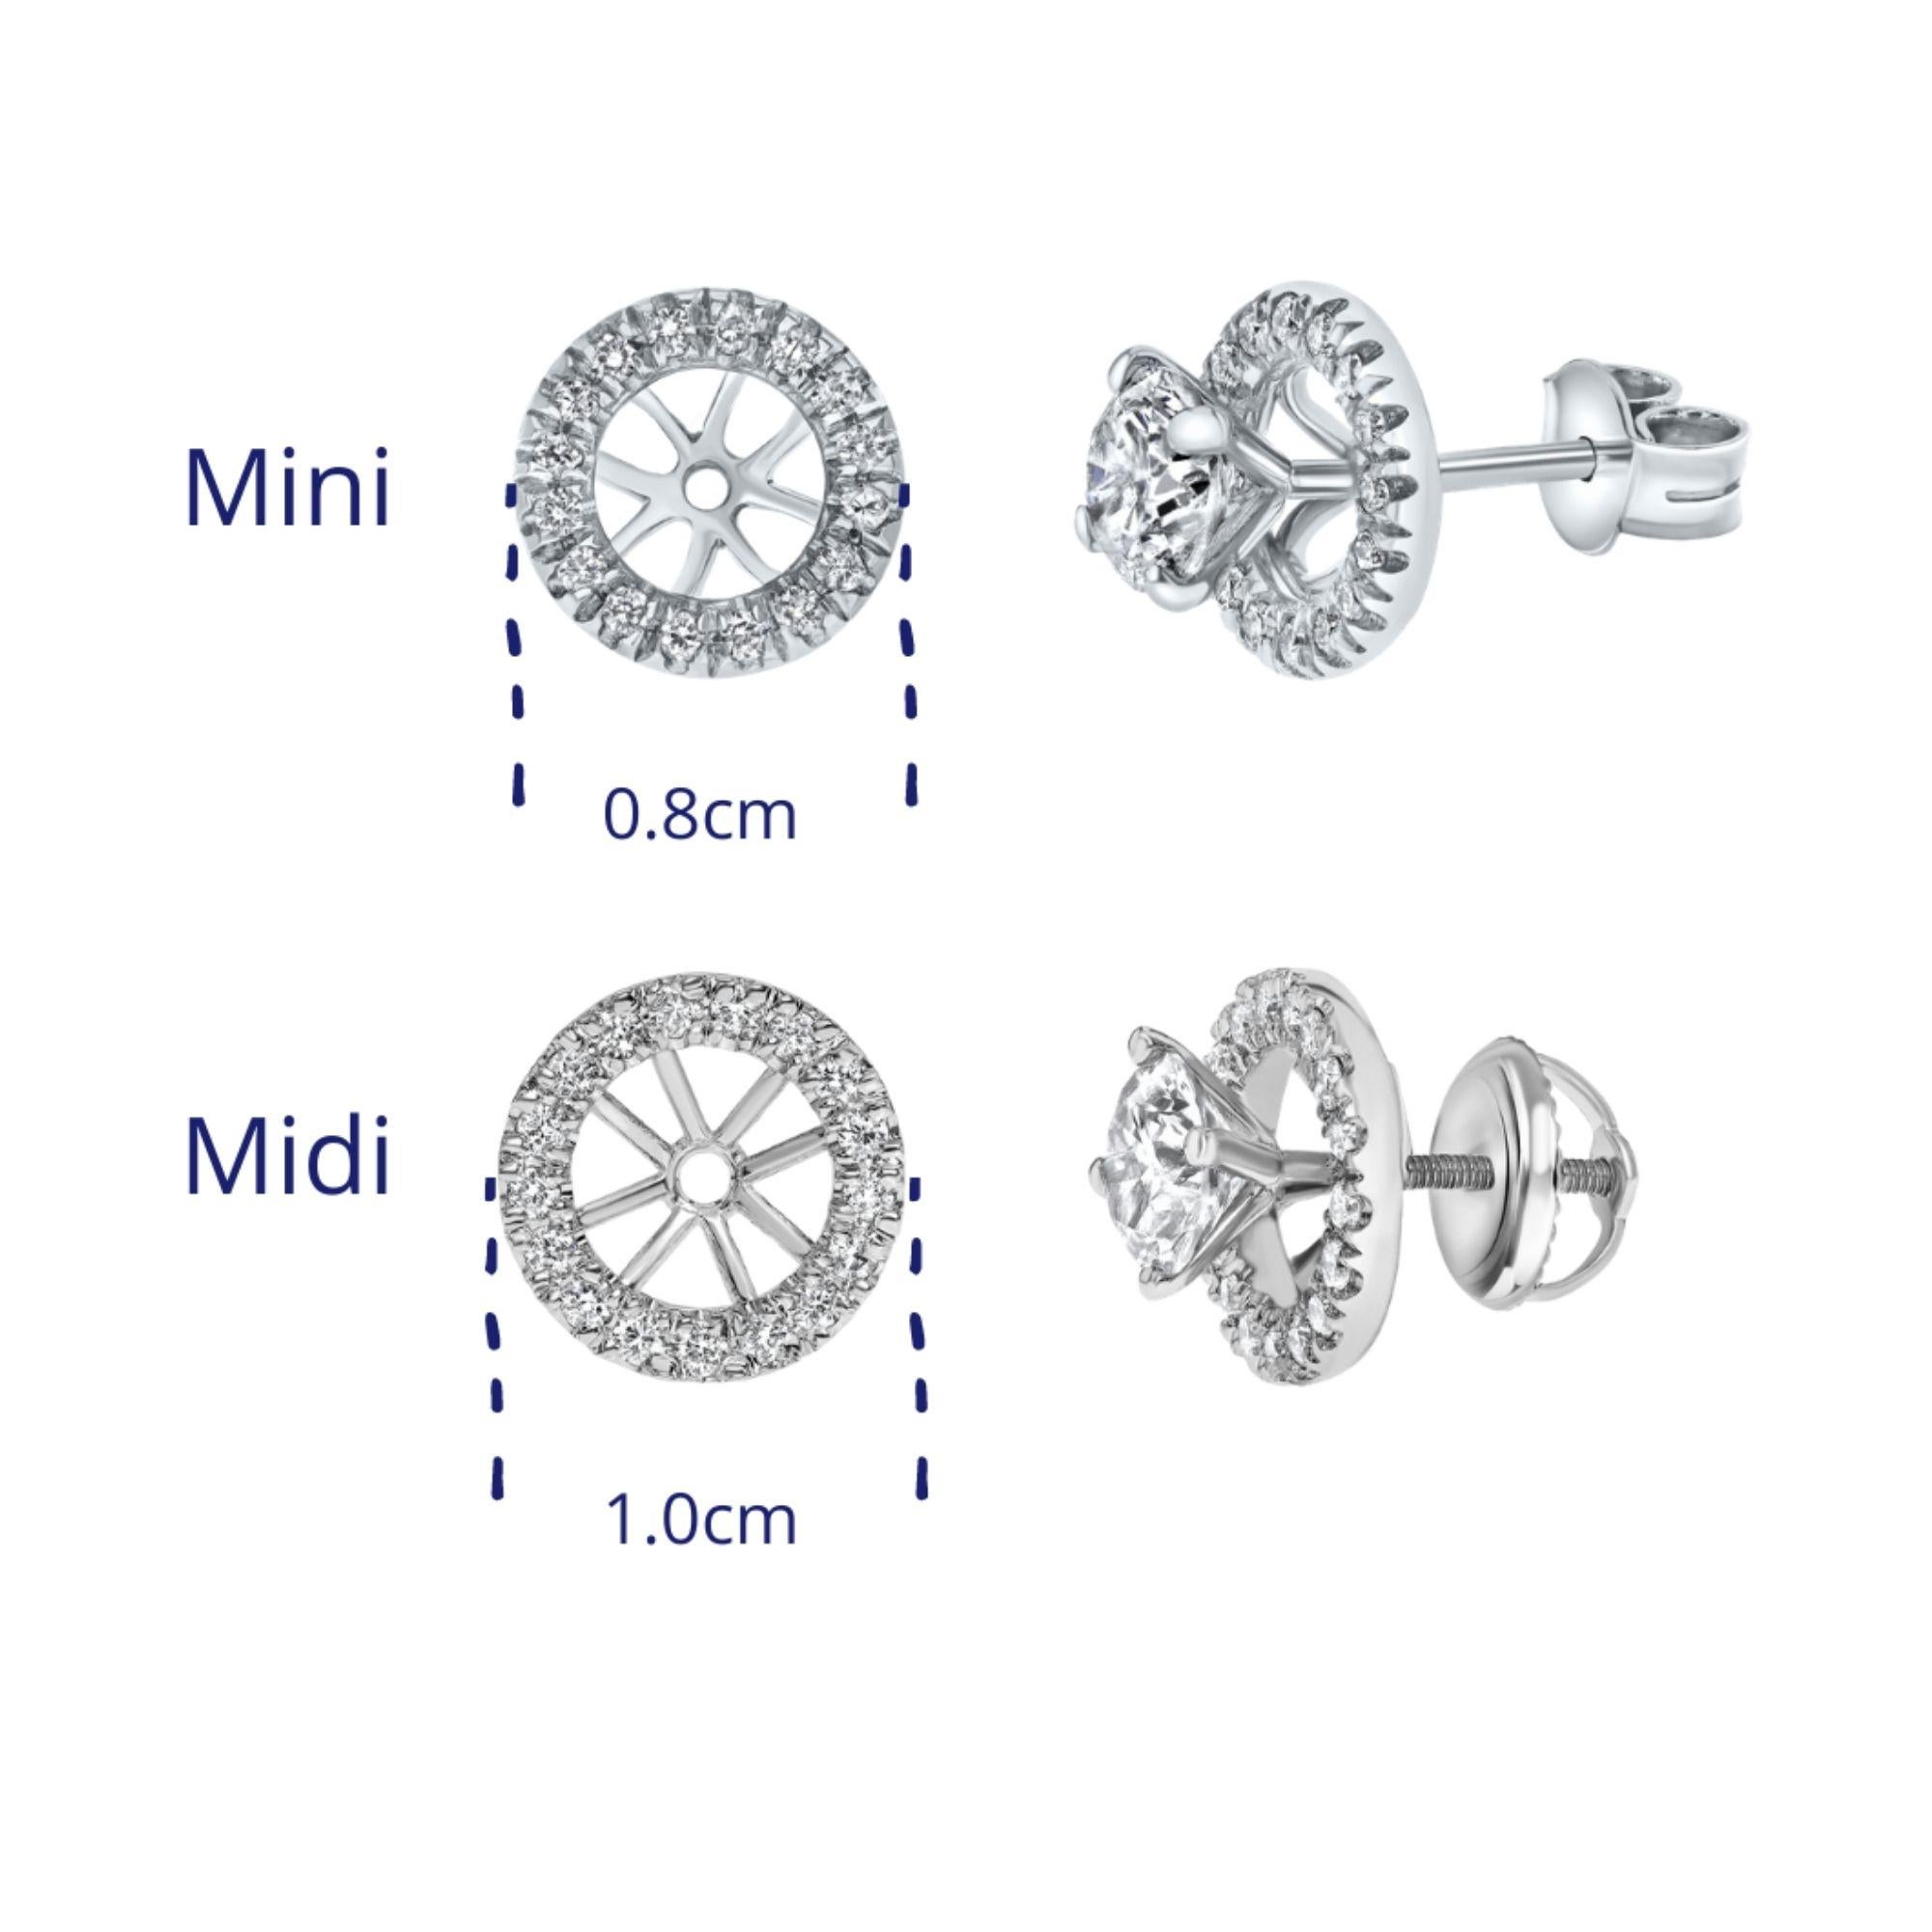 0.22 Carat Mini Round Diamond Ear Jacket Add-On in 14K White Gold -Shlomit Rogel

Jazz up your ear! Delicately embellished with white diamonds, this round 14k white gold ear extension will complete your stud earrings. You can add your own stud